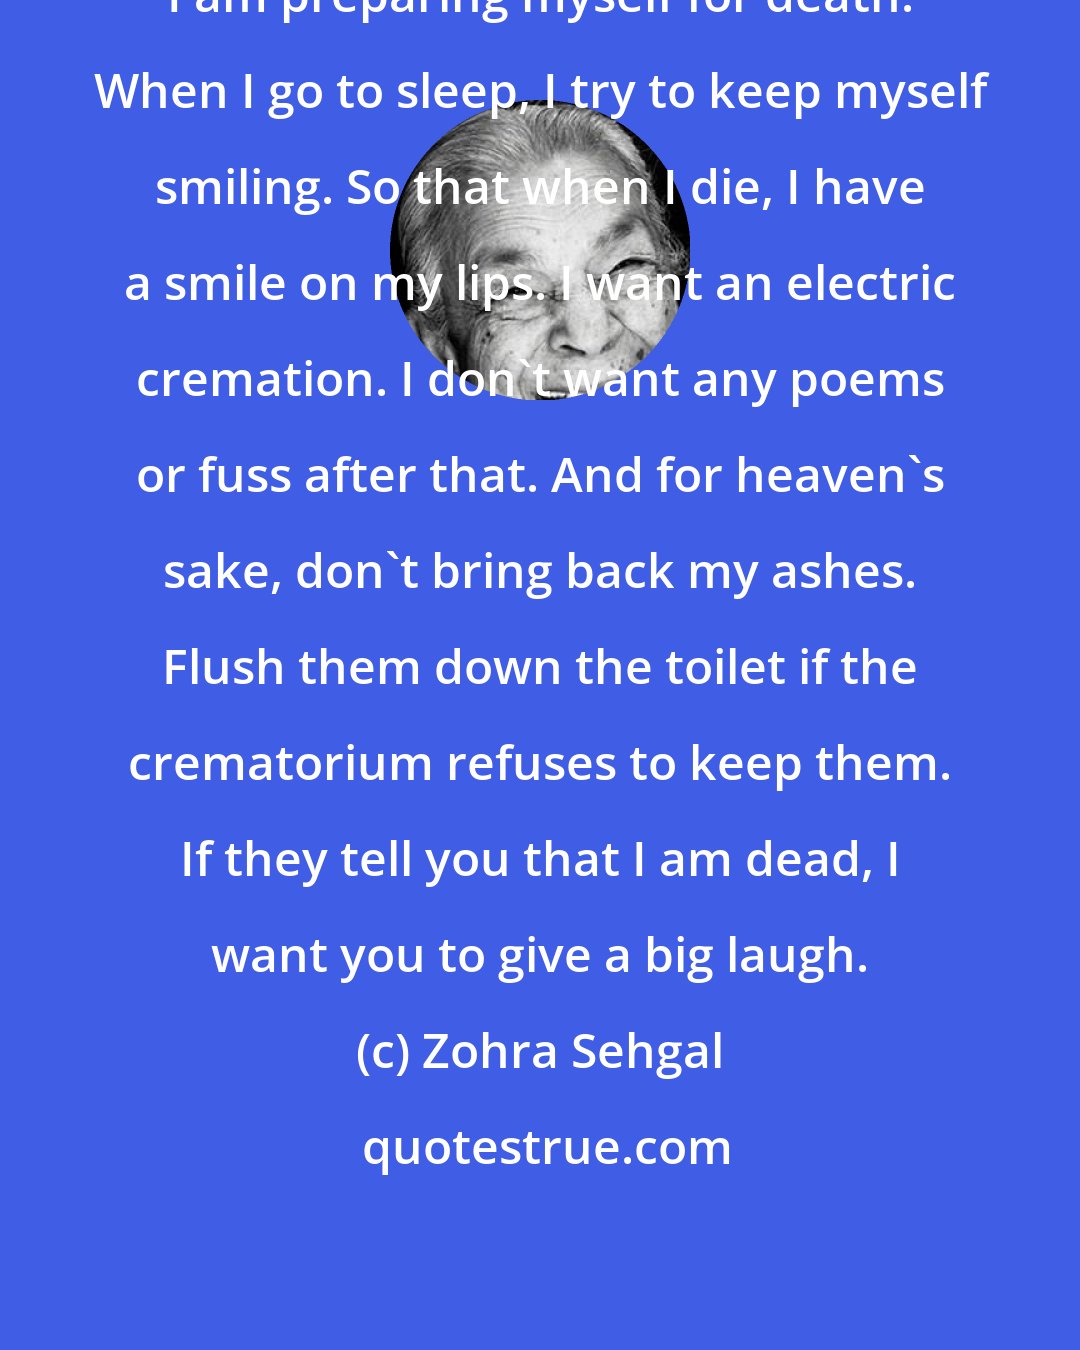 Zohra Sehgal: I am preparing myself for death. When I go to sleep, I try to keep myself smiling. So that when I die, I have a smile on my lips. I want an electric cremation. I don't want any poems or fuss after that. And for heaven's sake, don't bring back my ashes. Flush them down the toilet if the crematorium refuses to keep them. If they tell you that I am dead, I want you to give a big laugh.